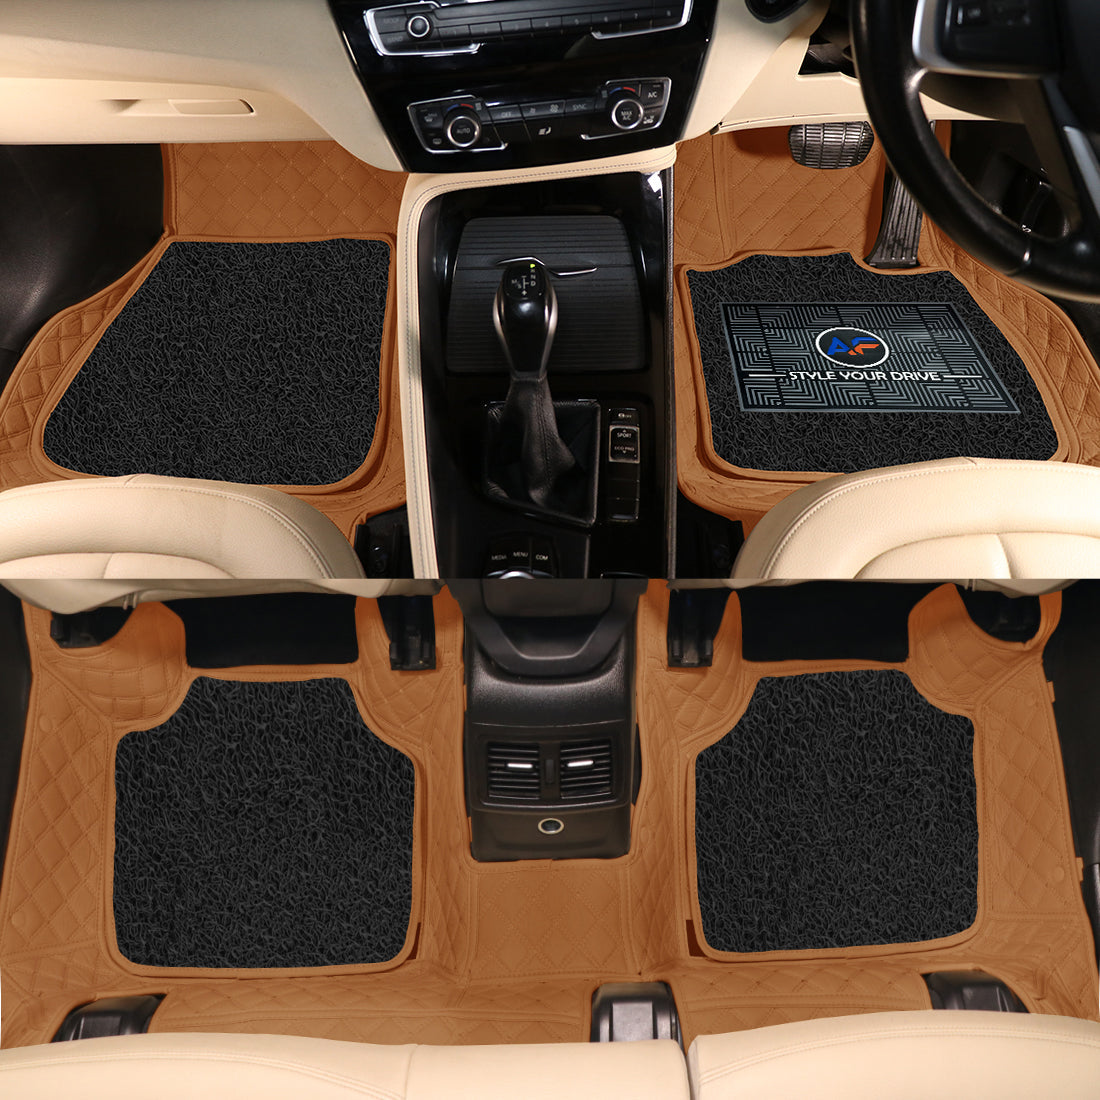 Mercedes GLS 2017 7D Luxury Car Mat, All Weather Proof, Anti-Skid, 100% Waterproof & Odorless with Unique Diamond Fish Design (24mm Luxury PU Leather, 2 Rows)